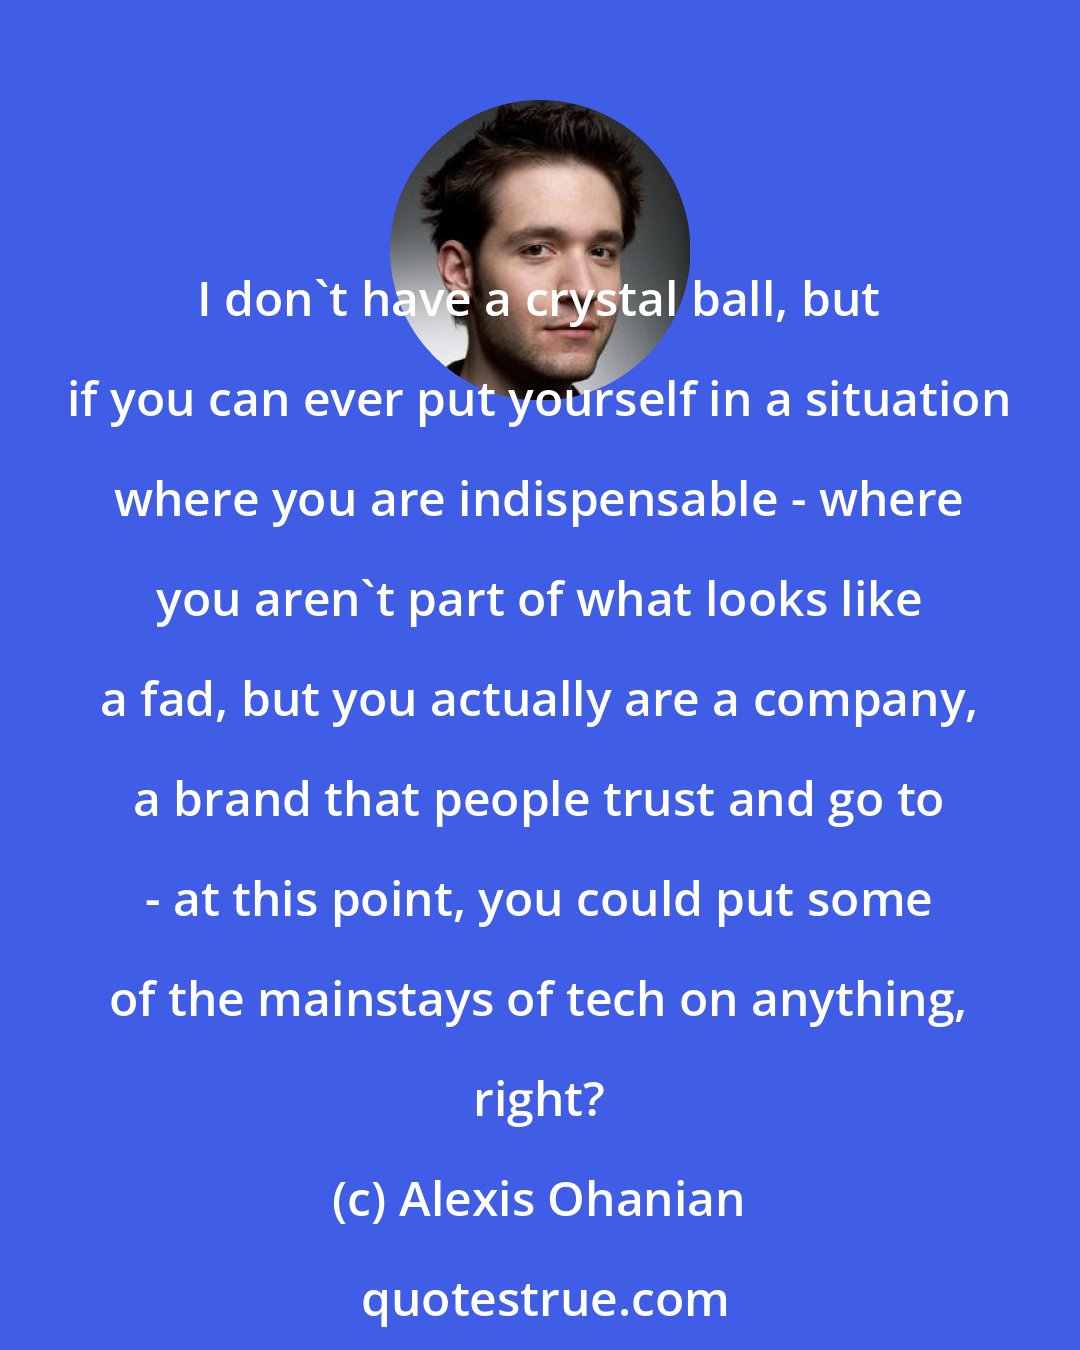 Alexis Ohanian: I don't have a crystal ball, but if you can ever put yourself in a situation where you are indispensable - where you aren't part of what looks like a fad, but you actually are a company, a brand that people trust and go to - at this point, you could put some of the mainstays of tech on anything, right?